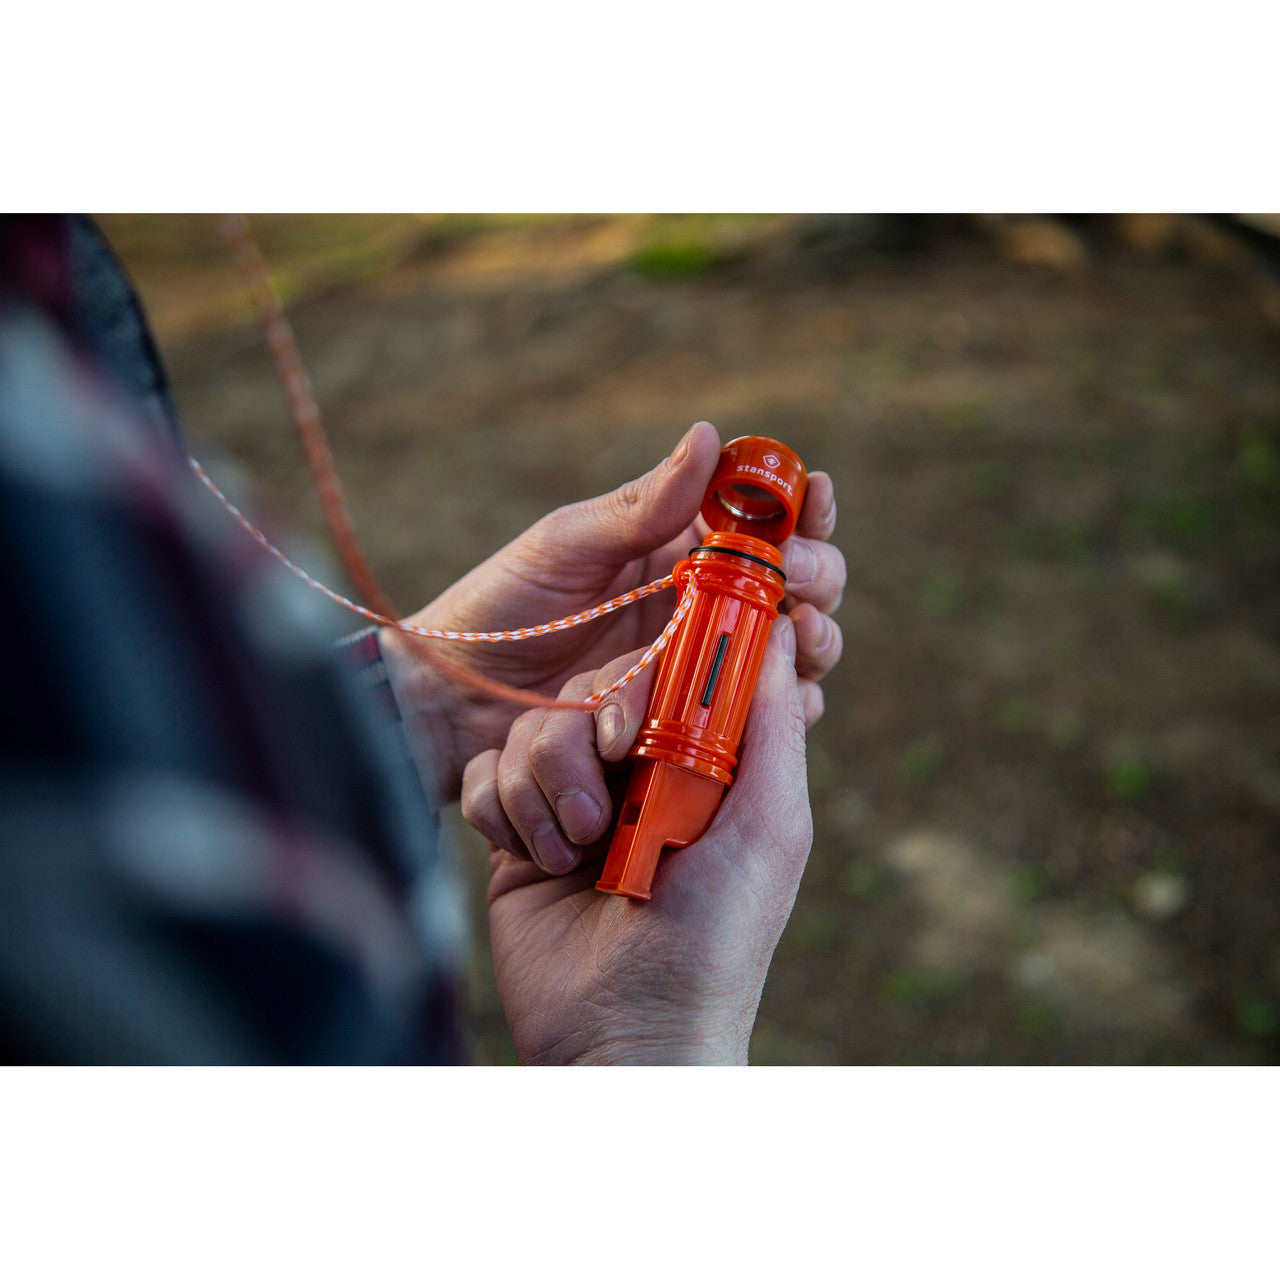 5-IN-1 PLASTIC SURVIVAL WHISTLE